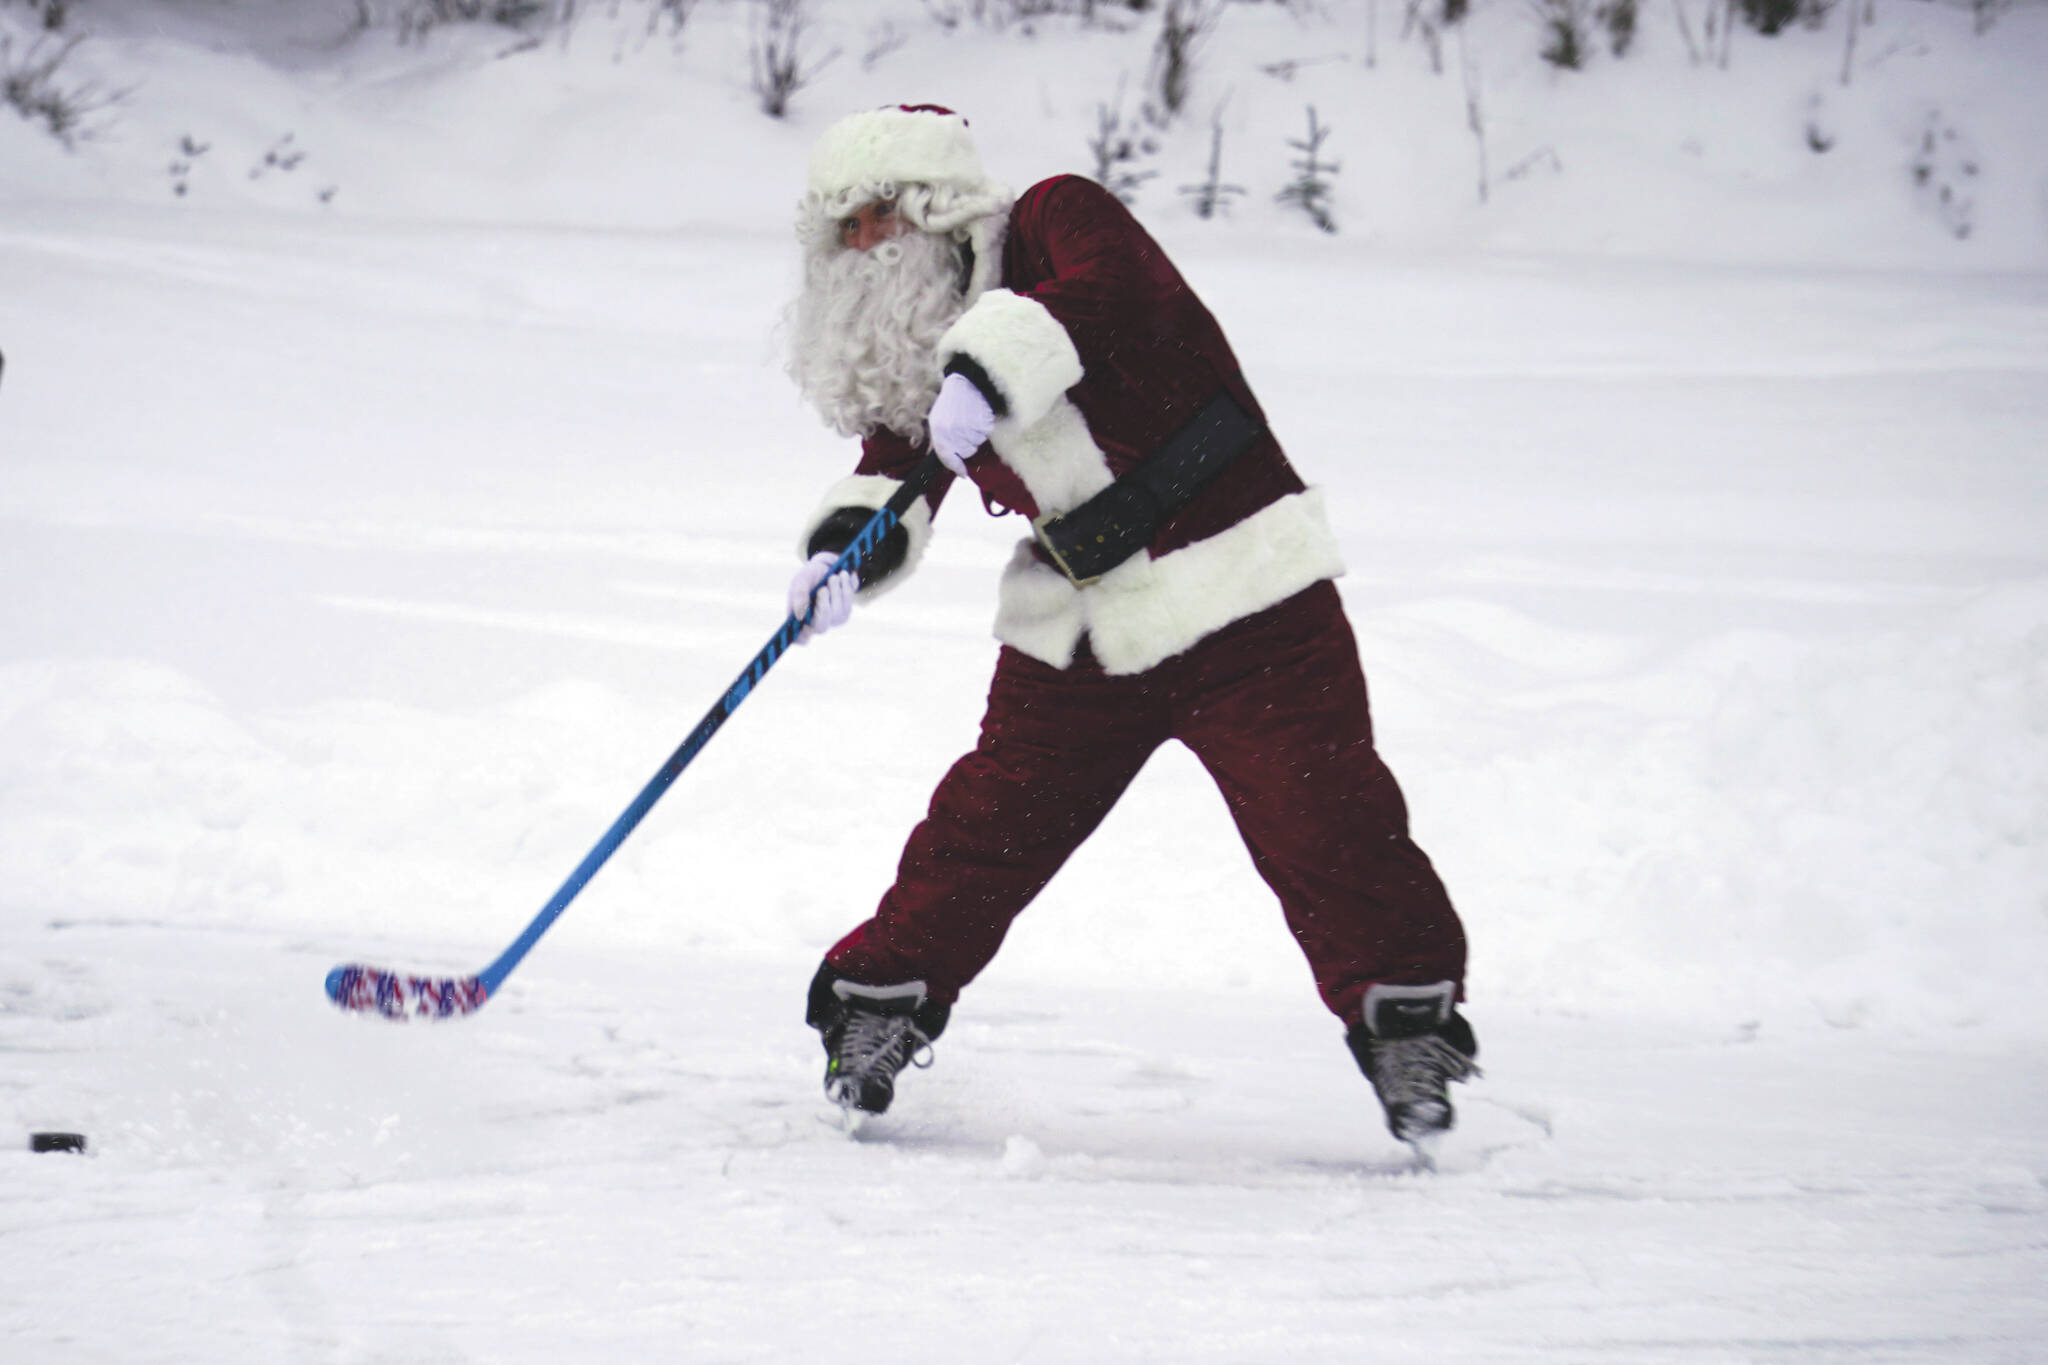 Jake Dye/Peninsula Clarion
Santa Claus joins children for some hockey action during A Day with the Clauses festivities at Daubenspeck Park in Kenai on Monday.